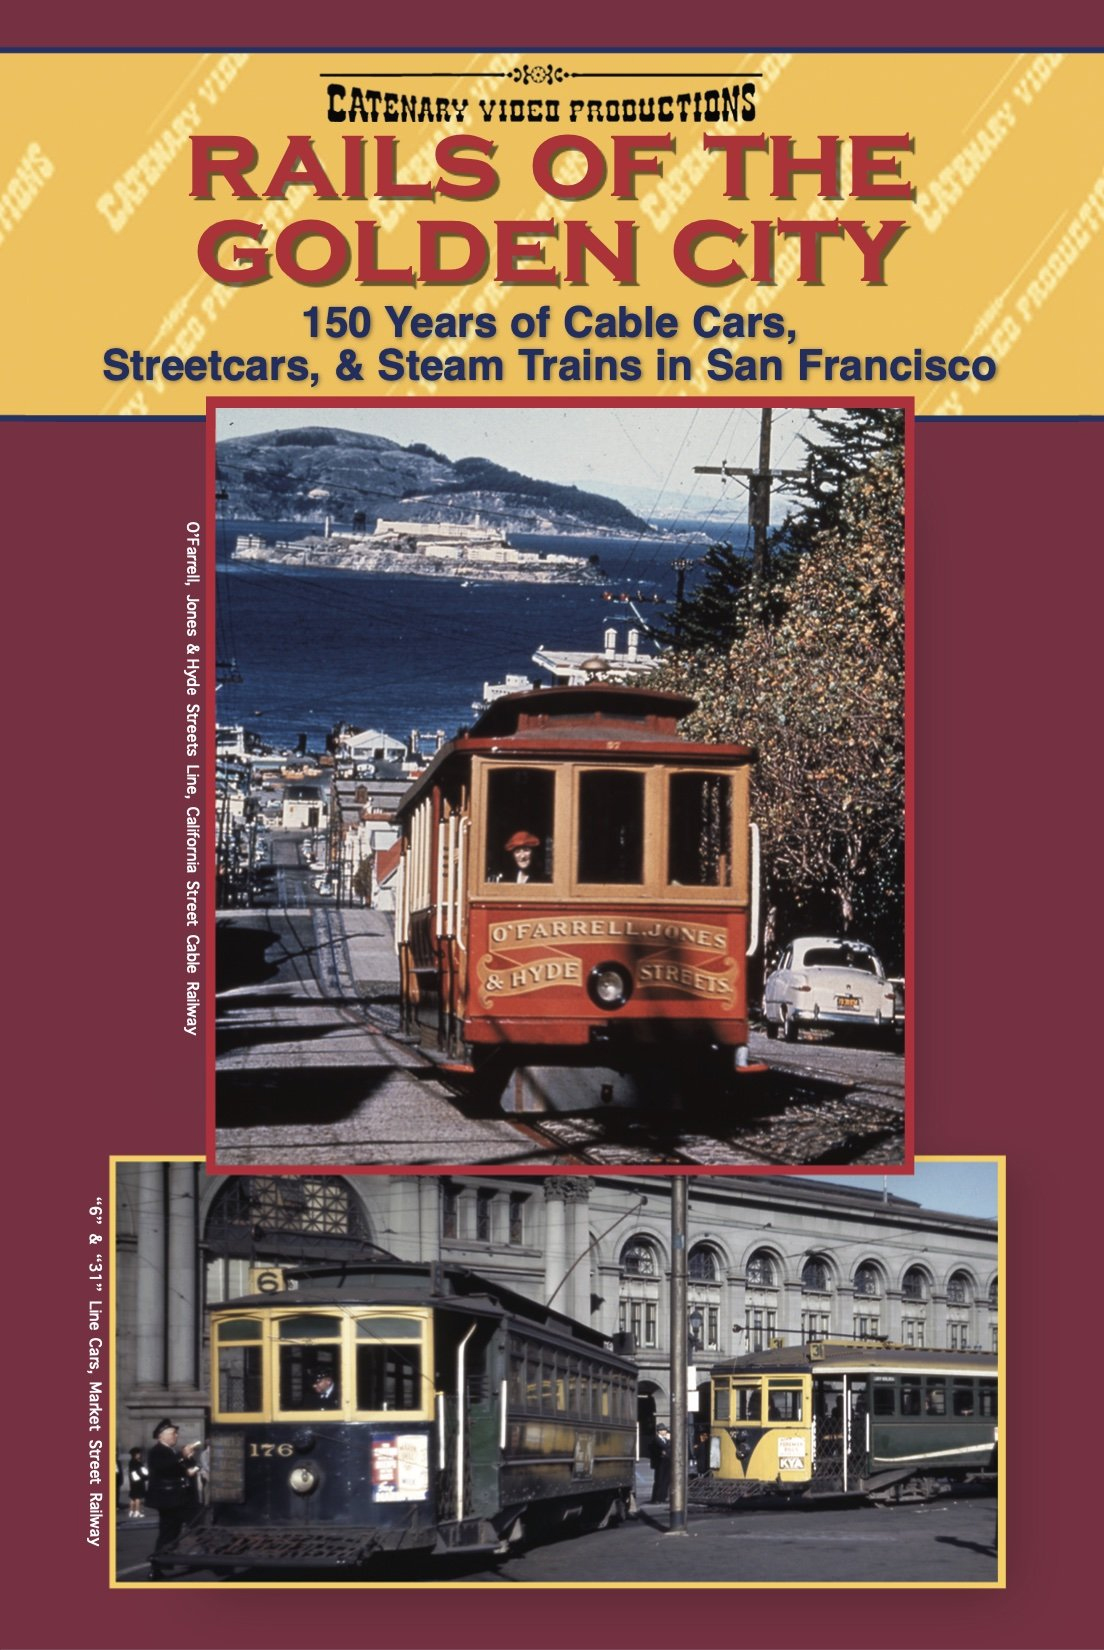 Rails of the Golden City 150 Years of Cable Cars Streetcars and Steam Trains in San Francisco DVD Catenary Video Productions DVD-CATVP-RGC 021808581645